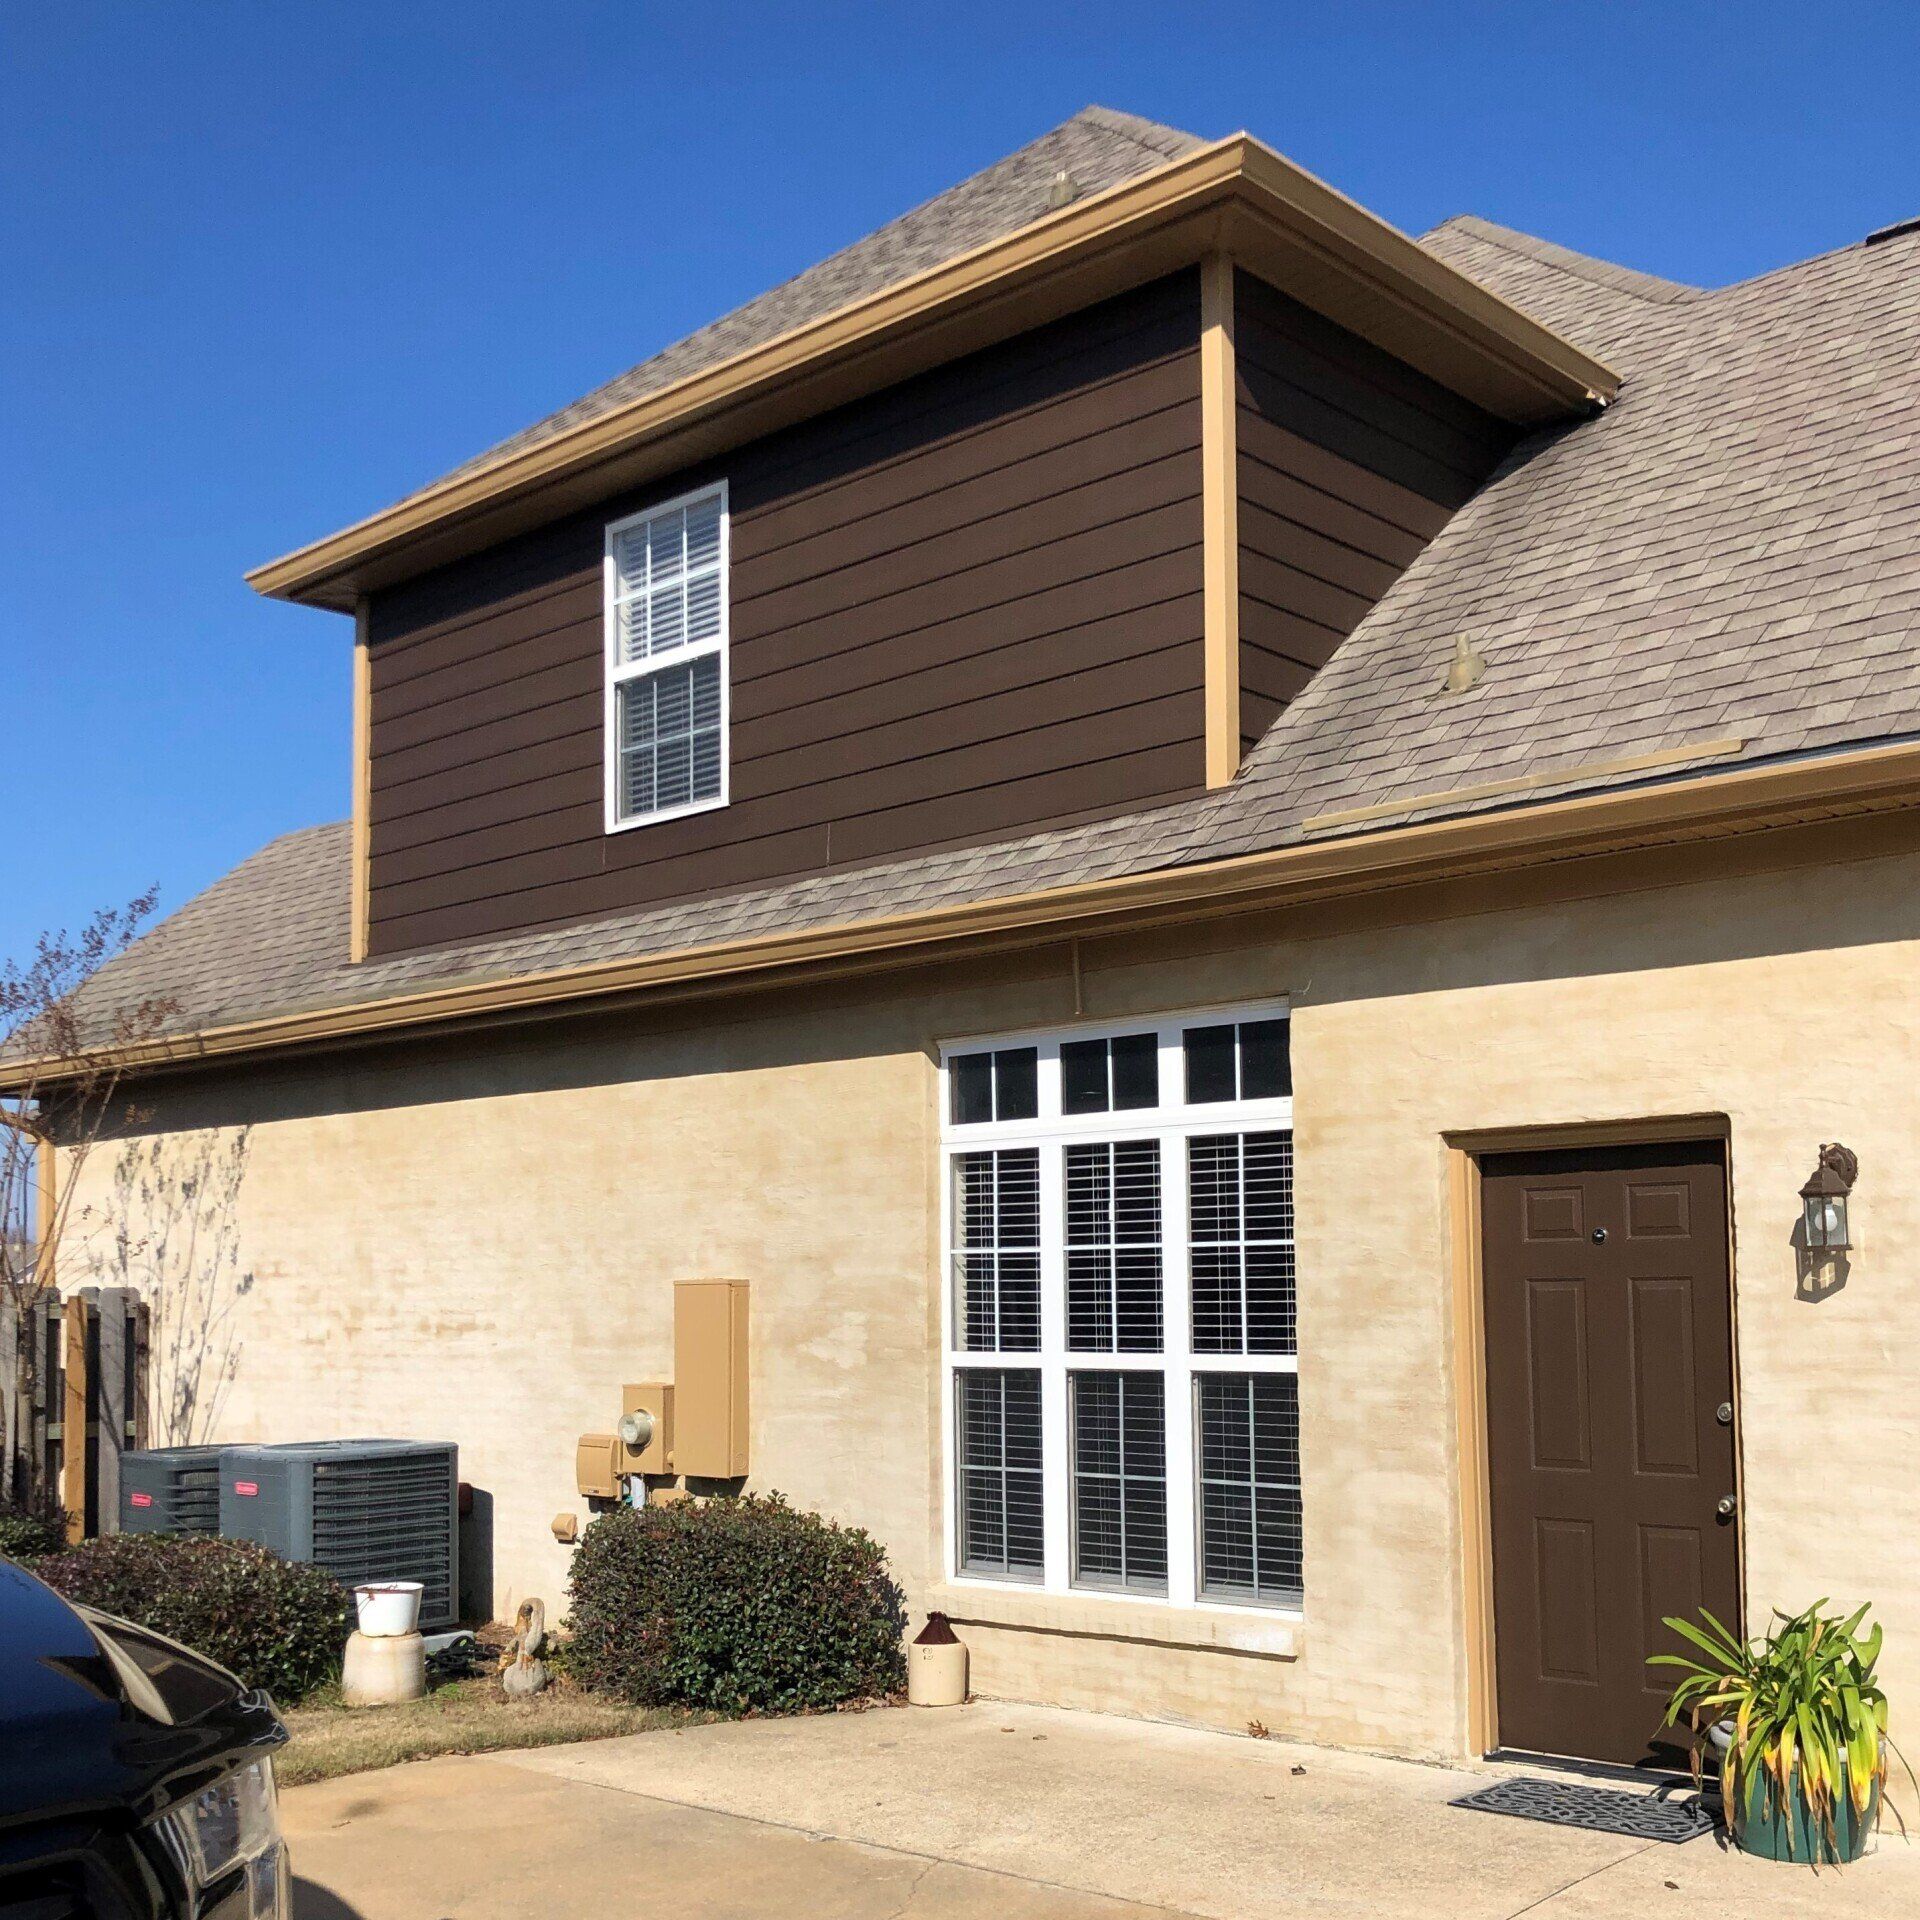 home tint - SPF Residential Tint with Industry-Leading Performance installed 1.13.2021 in Deer Creek, AL